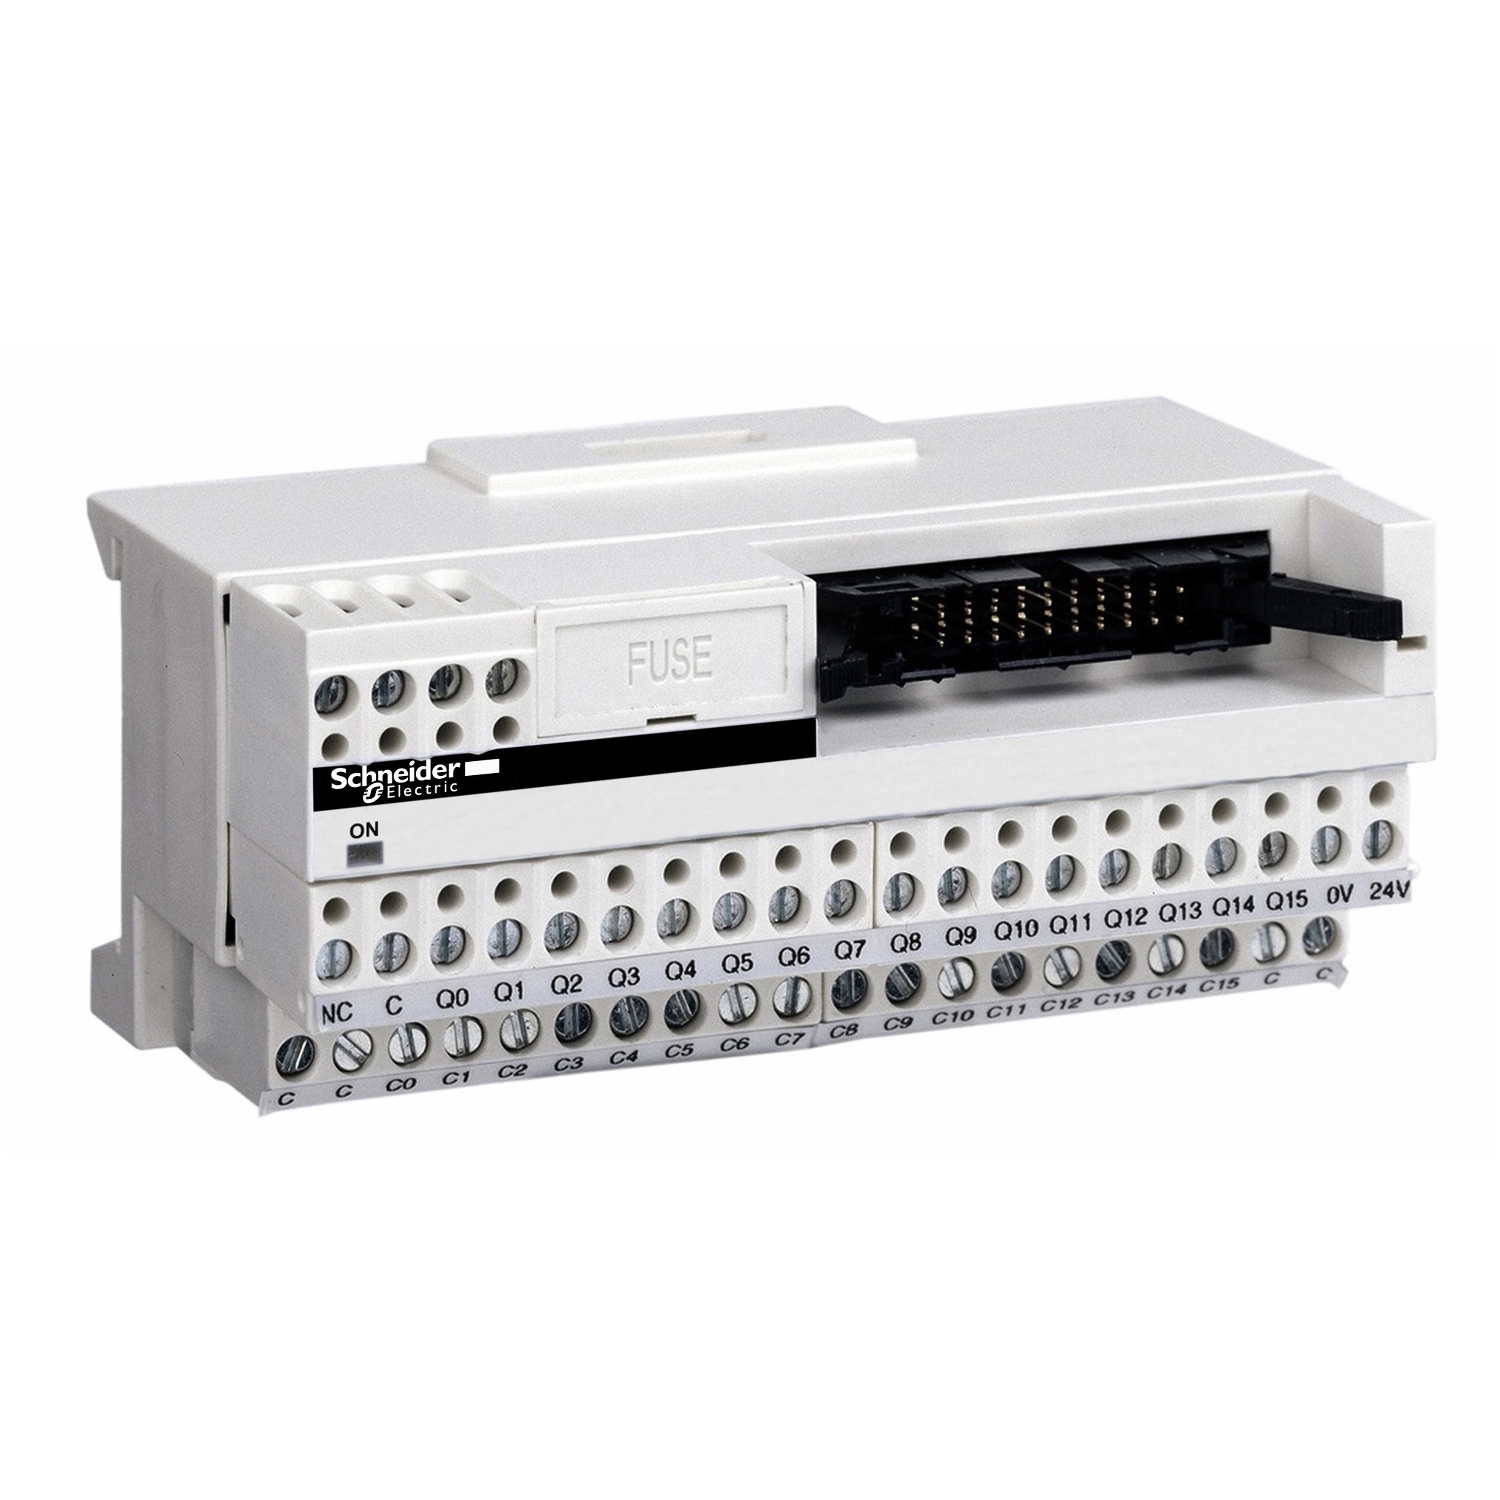 passive connection sub-base ABE7 - 16 inputs or outputs - Led FOR PLC